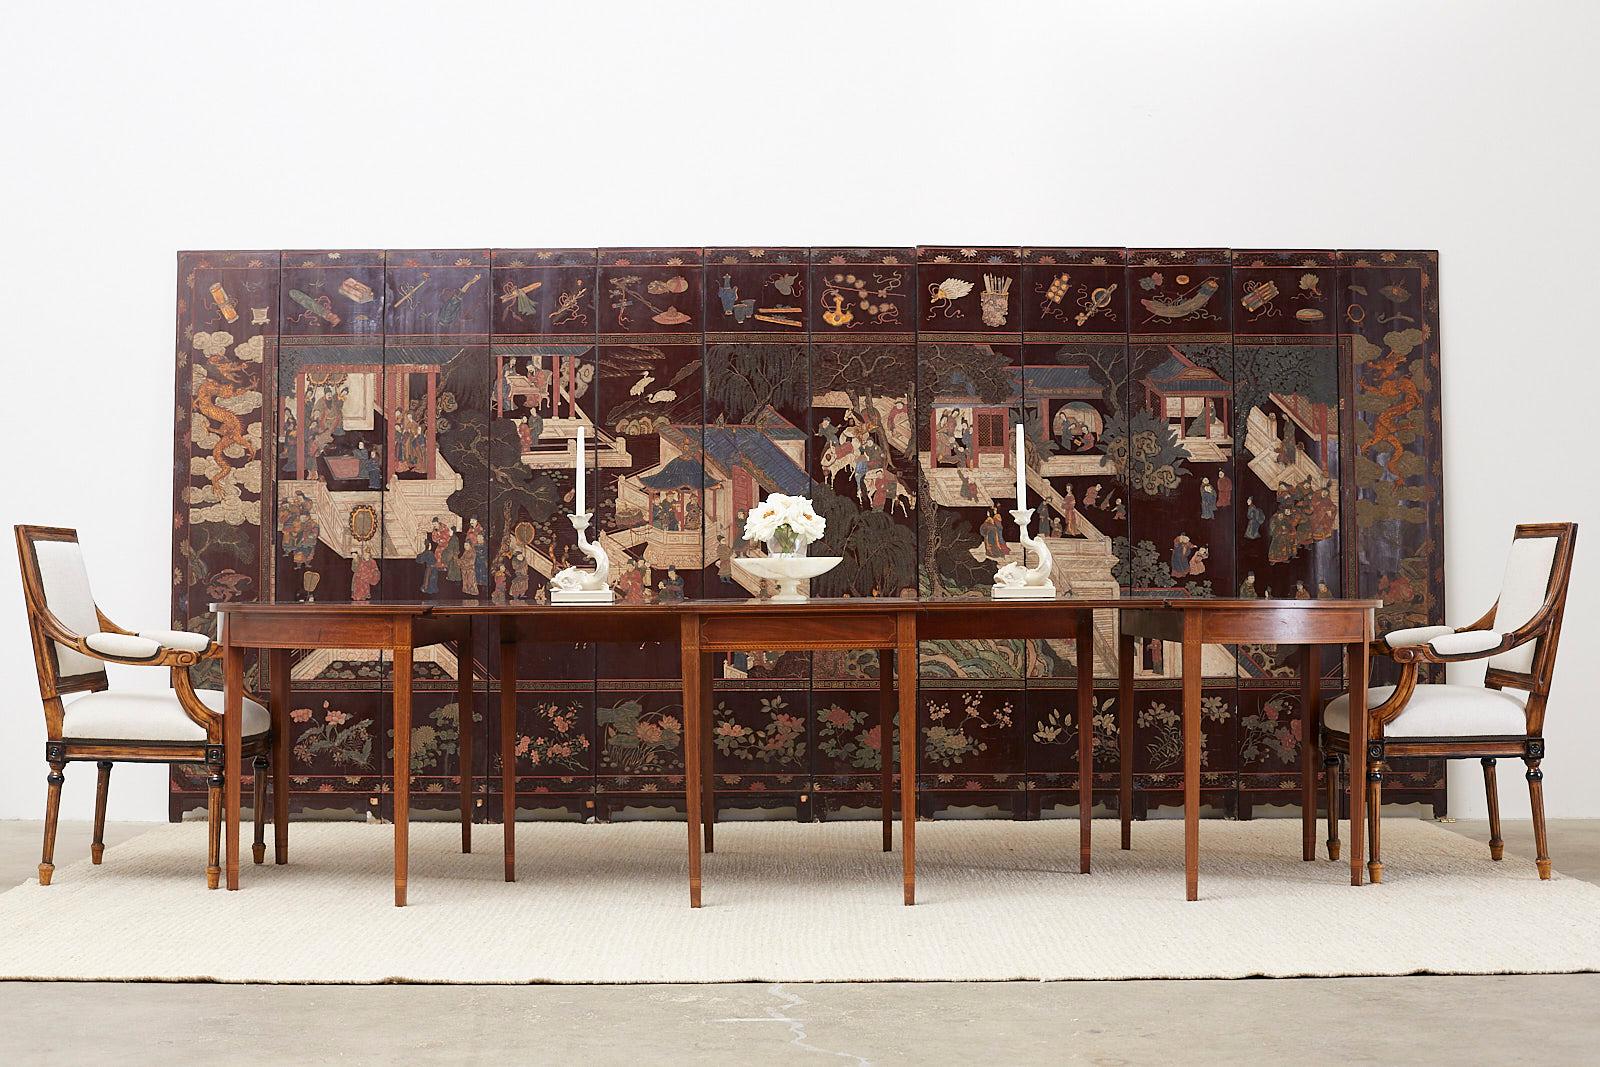 Captivating Chinese late 19th century Qing dynasty twelve-panel lacquered Coromandel screen. Intricately carved courtyard scene amid pagodas and trees. Bordered with floral and foliate carvings on bottom with scholars objects on the top. Each